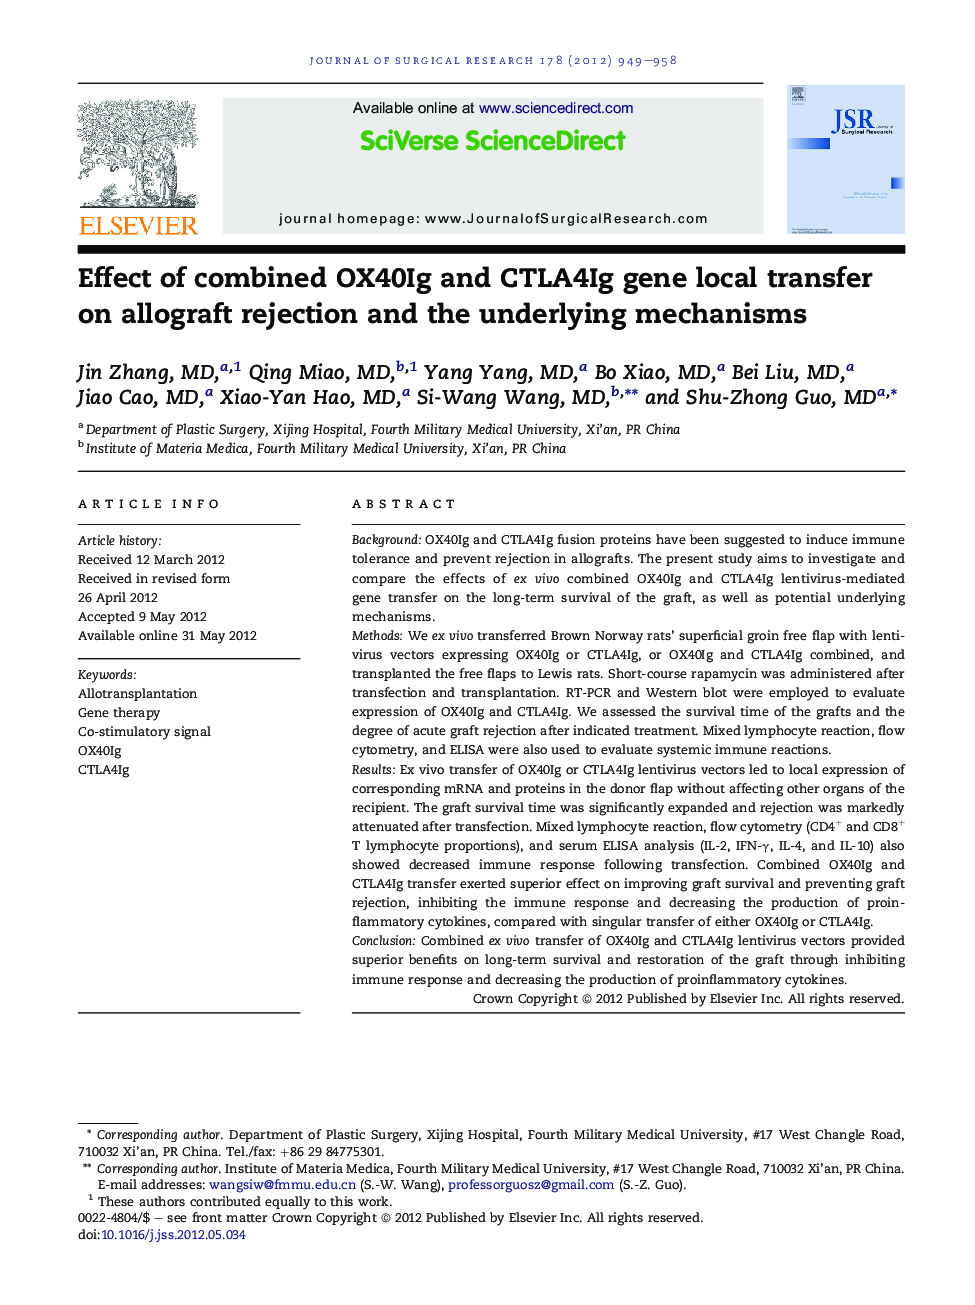 Transplantation/ImmunologyEffect of combined OX40Ig and CTLA4Ig gene local transfer on allograft rejection and the underlying mechanisms